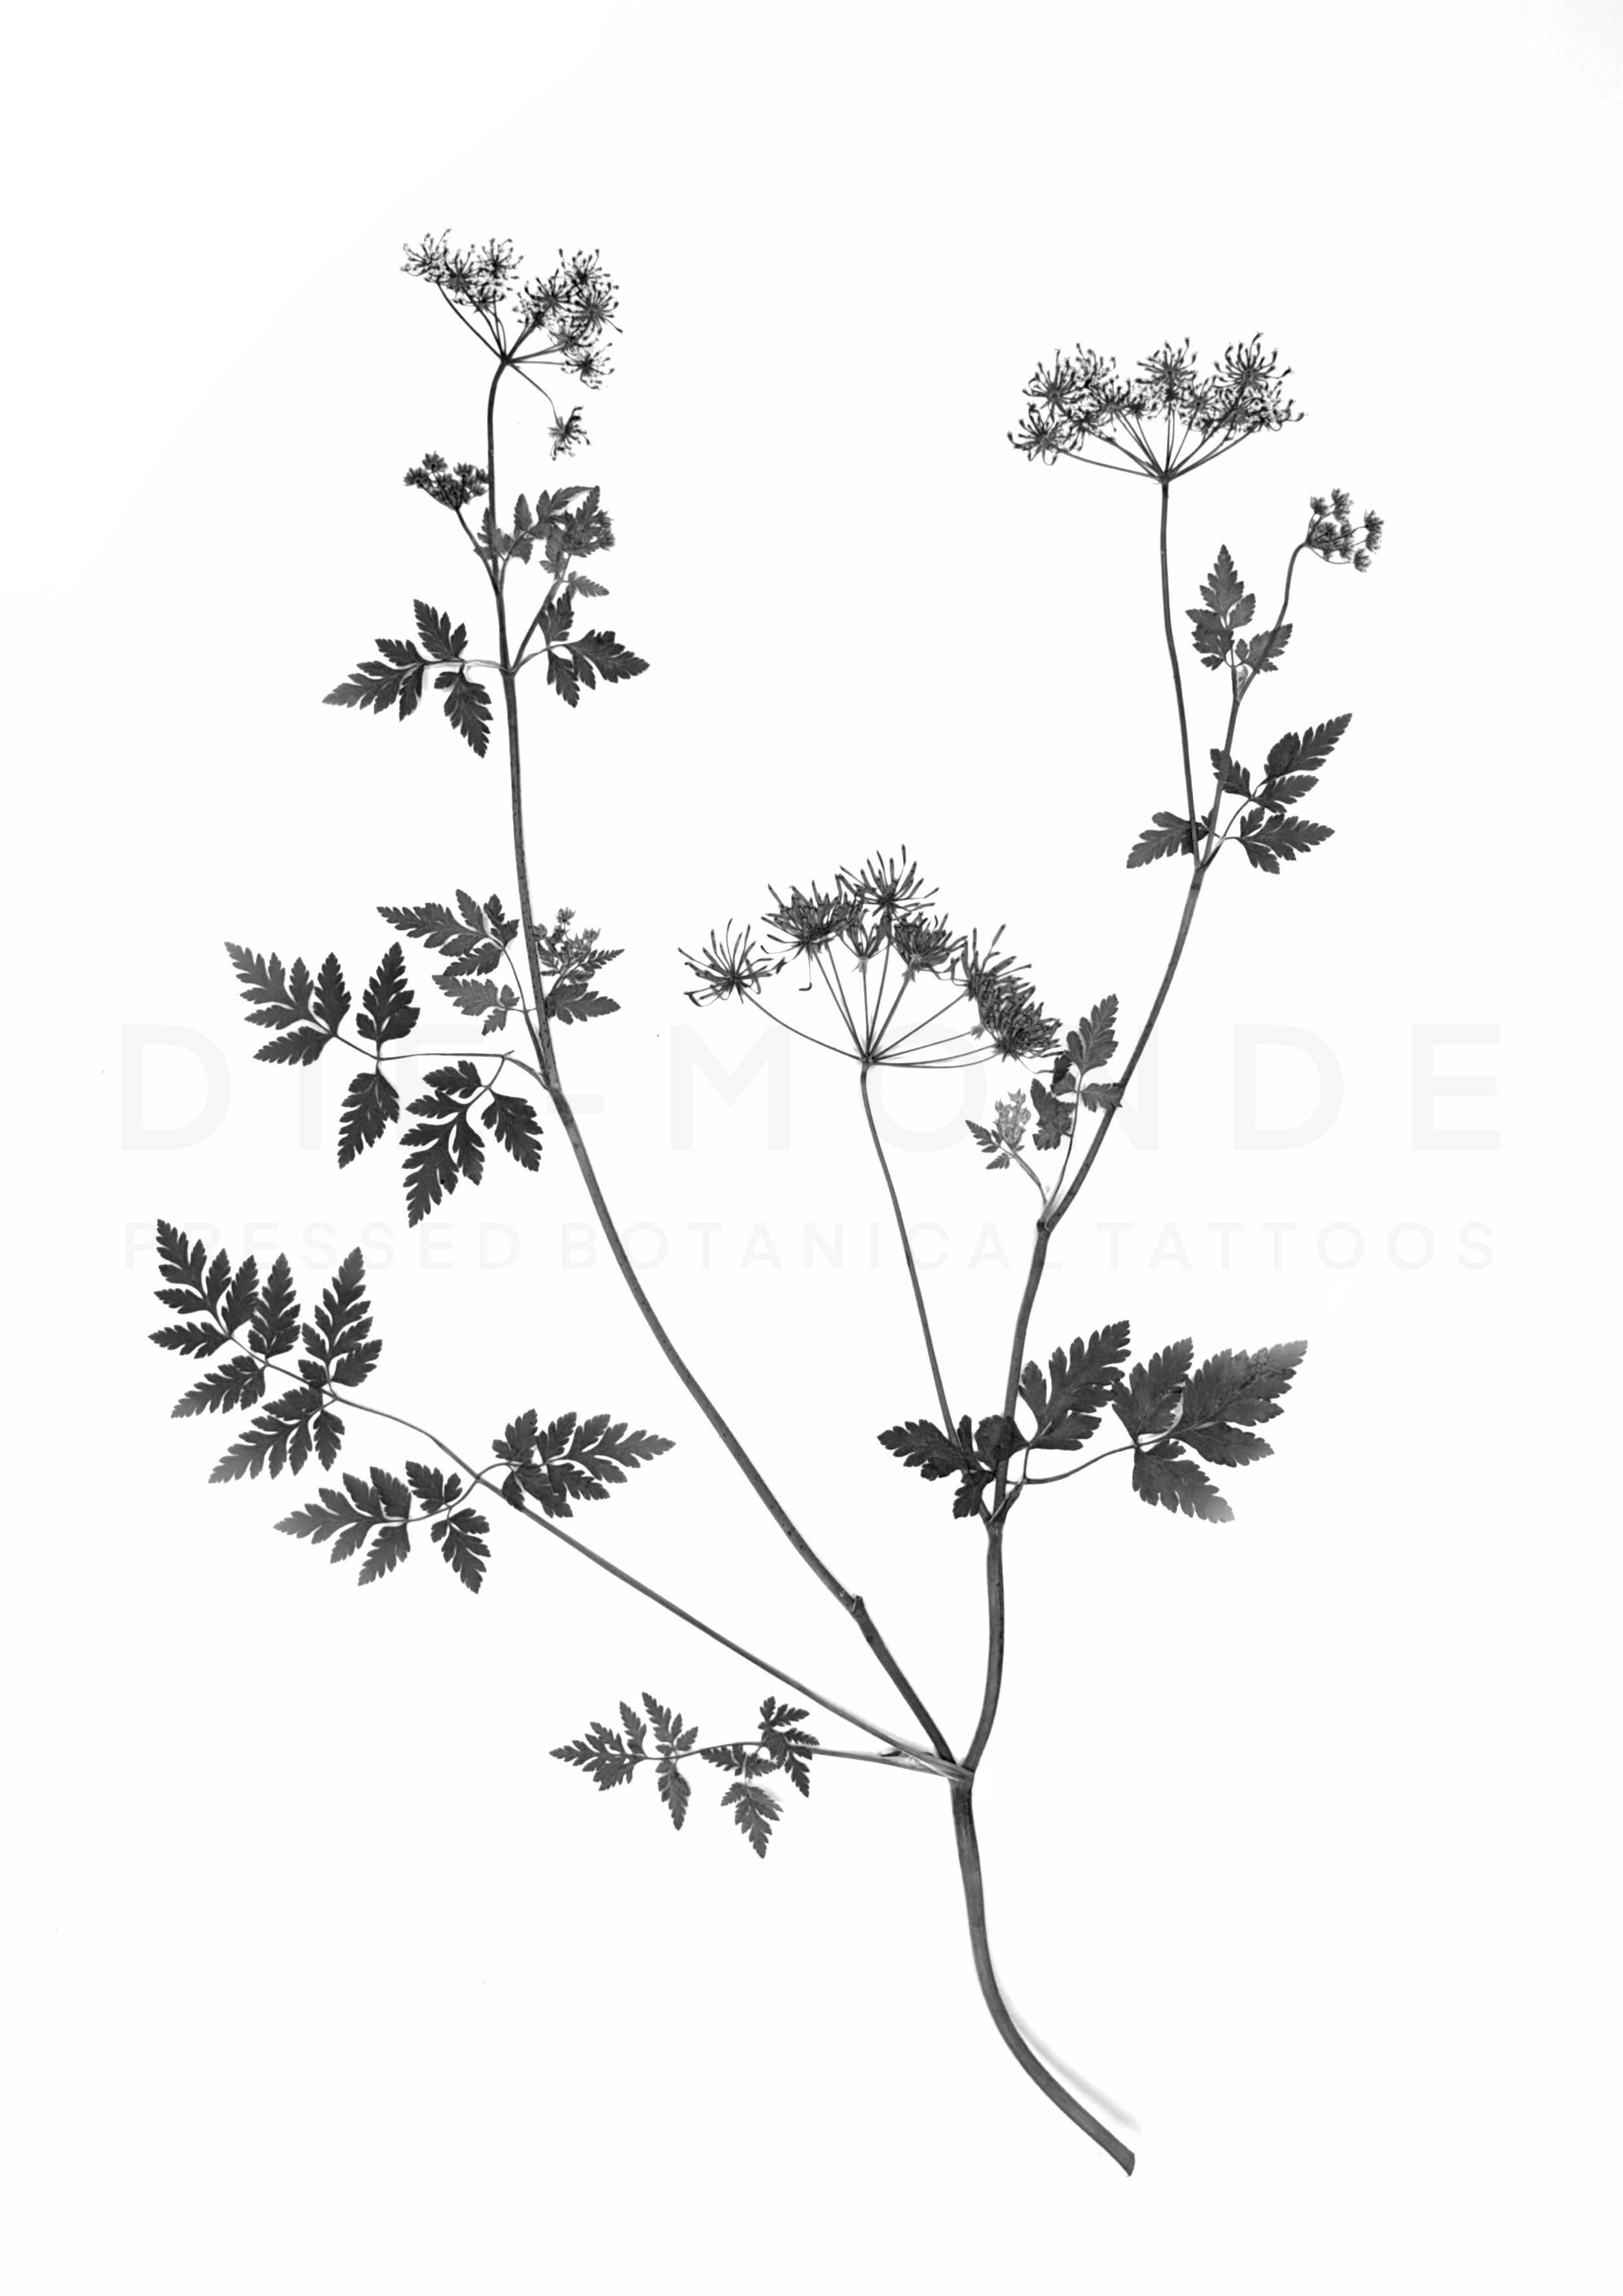 Flash no. 4 Cow Parsley, £700, Size: 35-40cm (length), Estimated time: 8 hours over 2 sittings